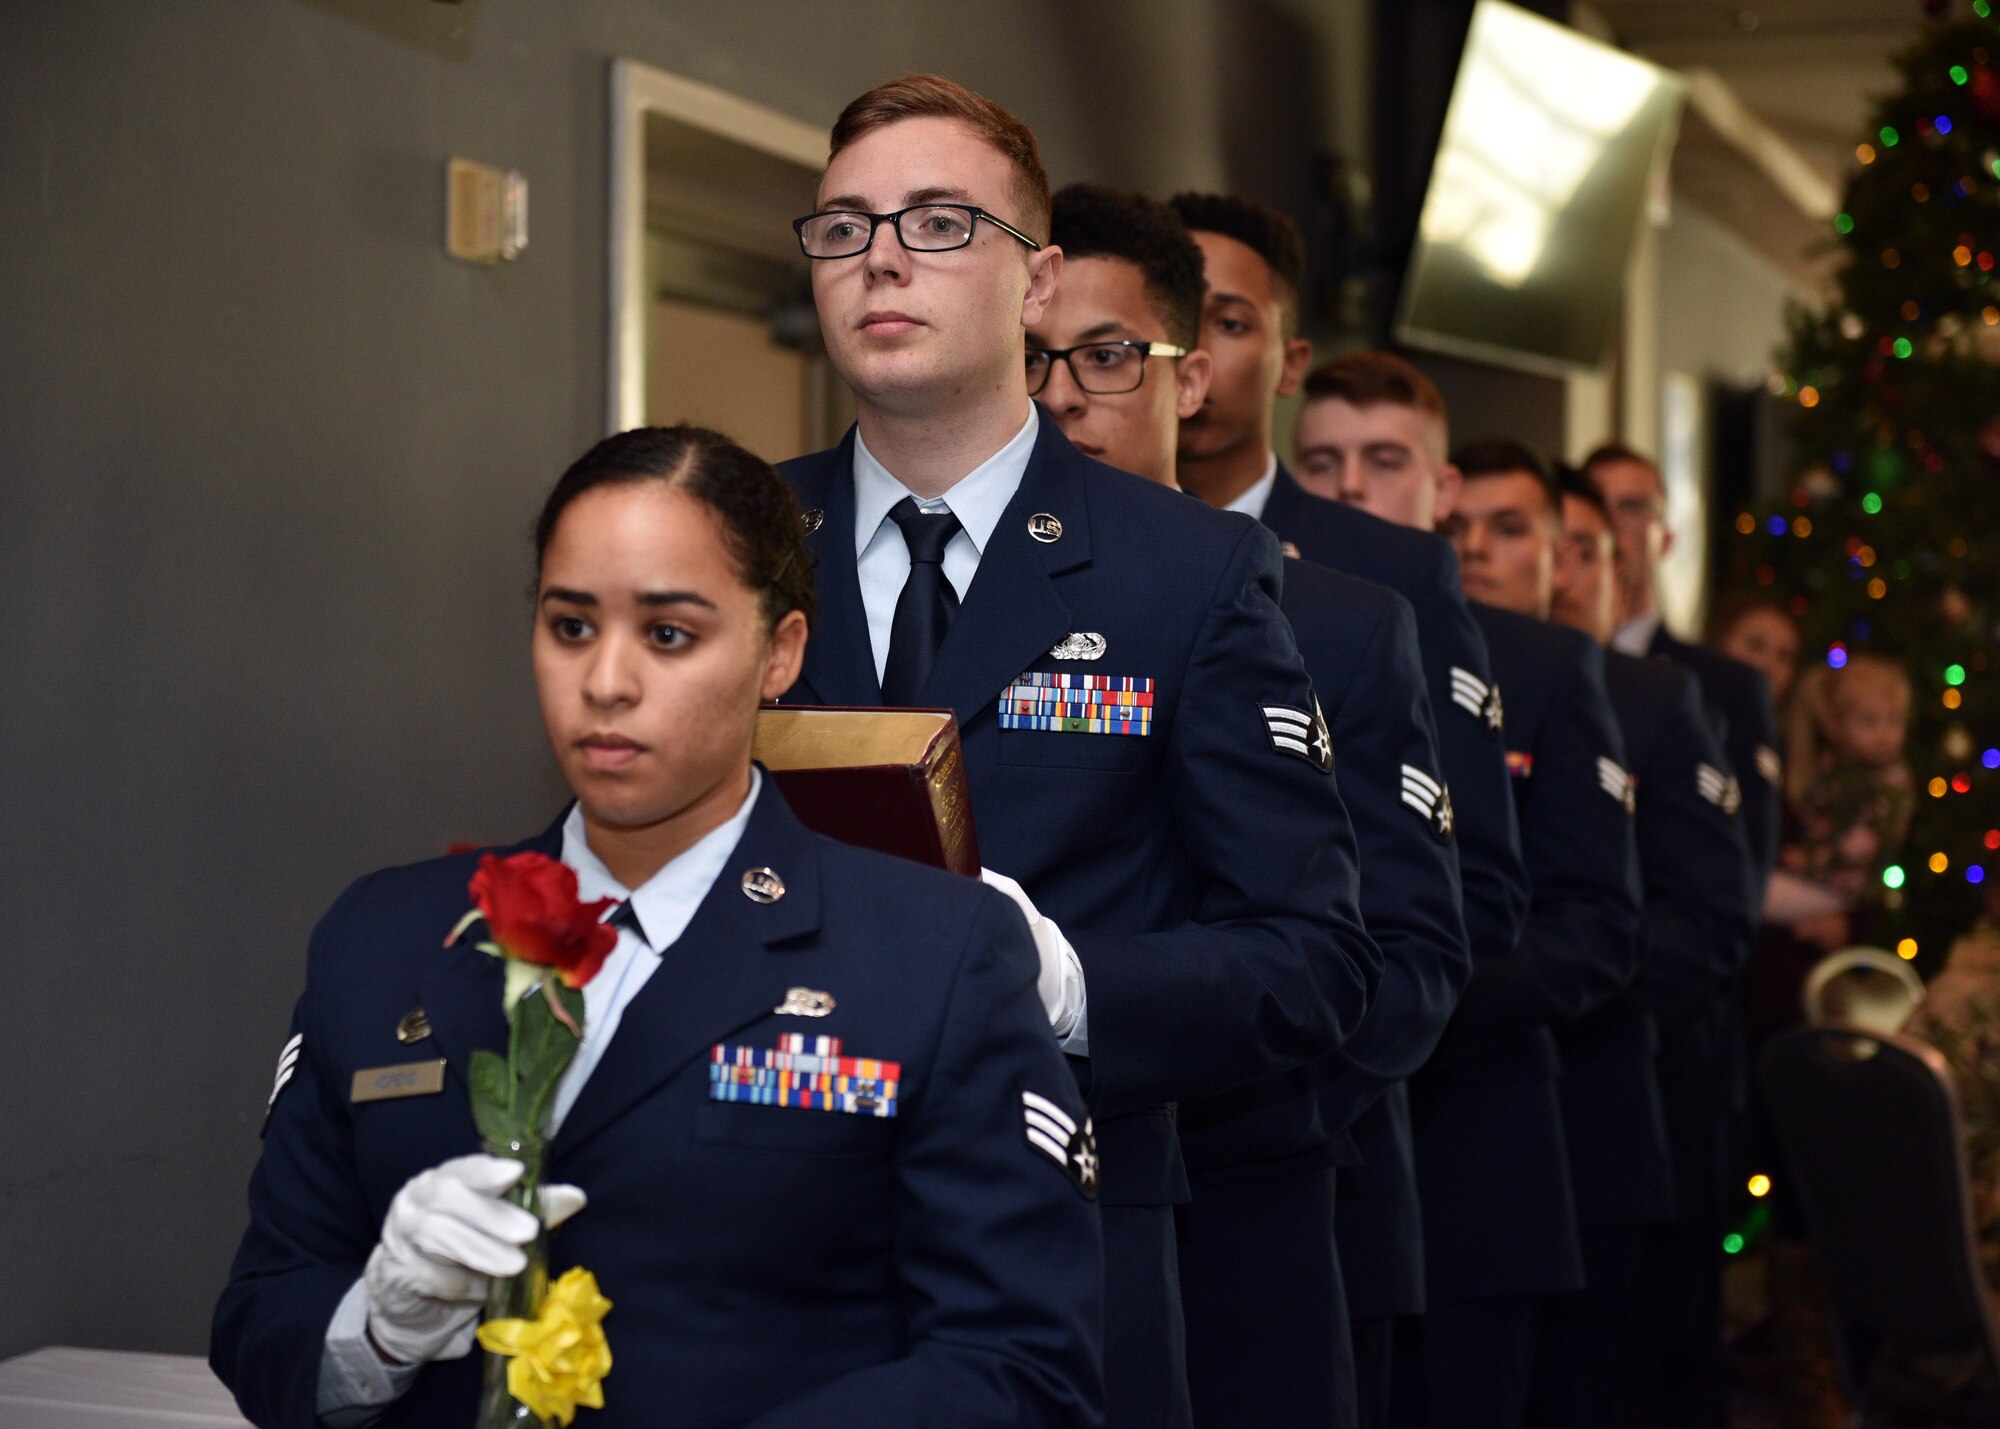 Graduates of Airman Leadership School Class 20-A prepare to set the POW/MIA table during the ALS Graduation ceremony at the event center on Goodfellow Air Force Base, Texas, December 12, 2019. The table was set as a symbol of honor and remembrance of America’s prisoners of war and missing comrades across all branches. (U.S. Air Force photo by Airman 1st Class Robyn Hunsinger)